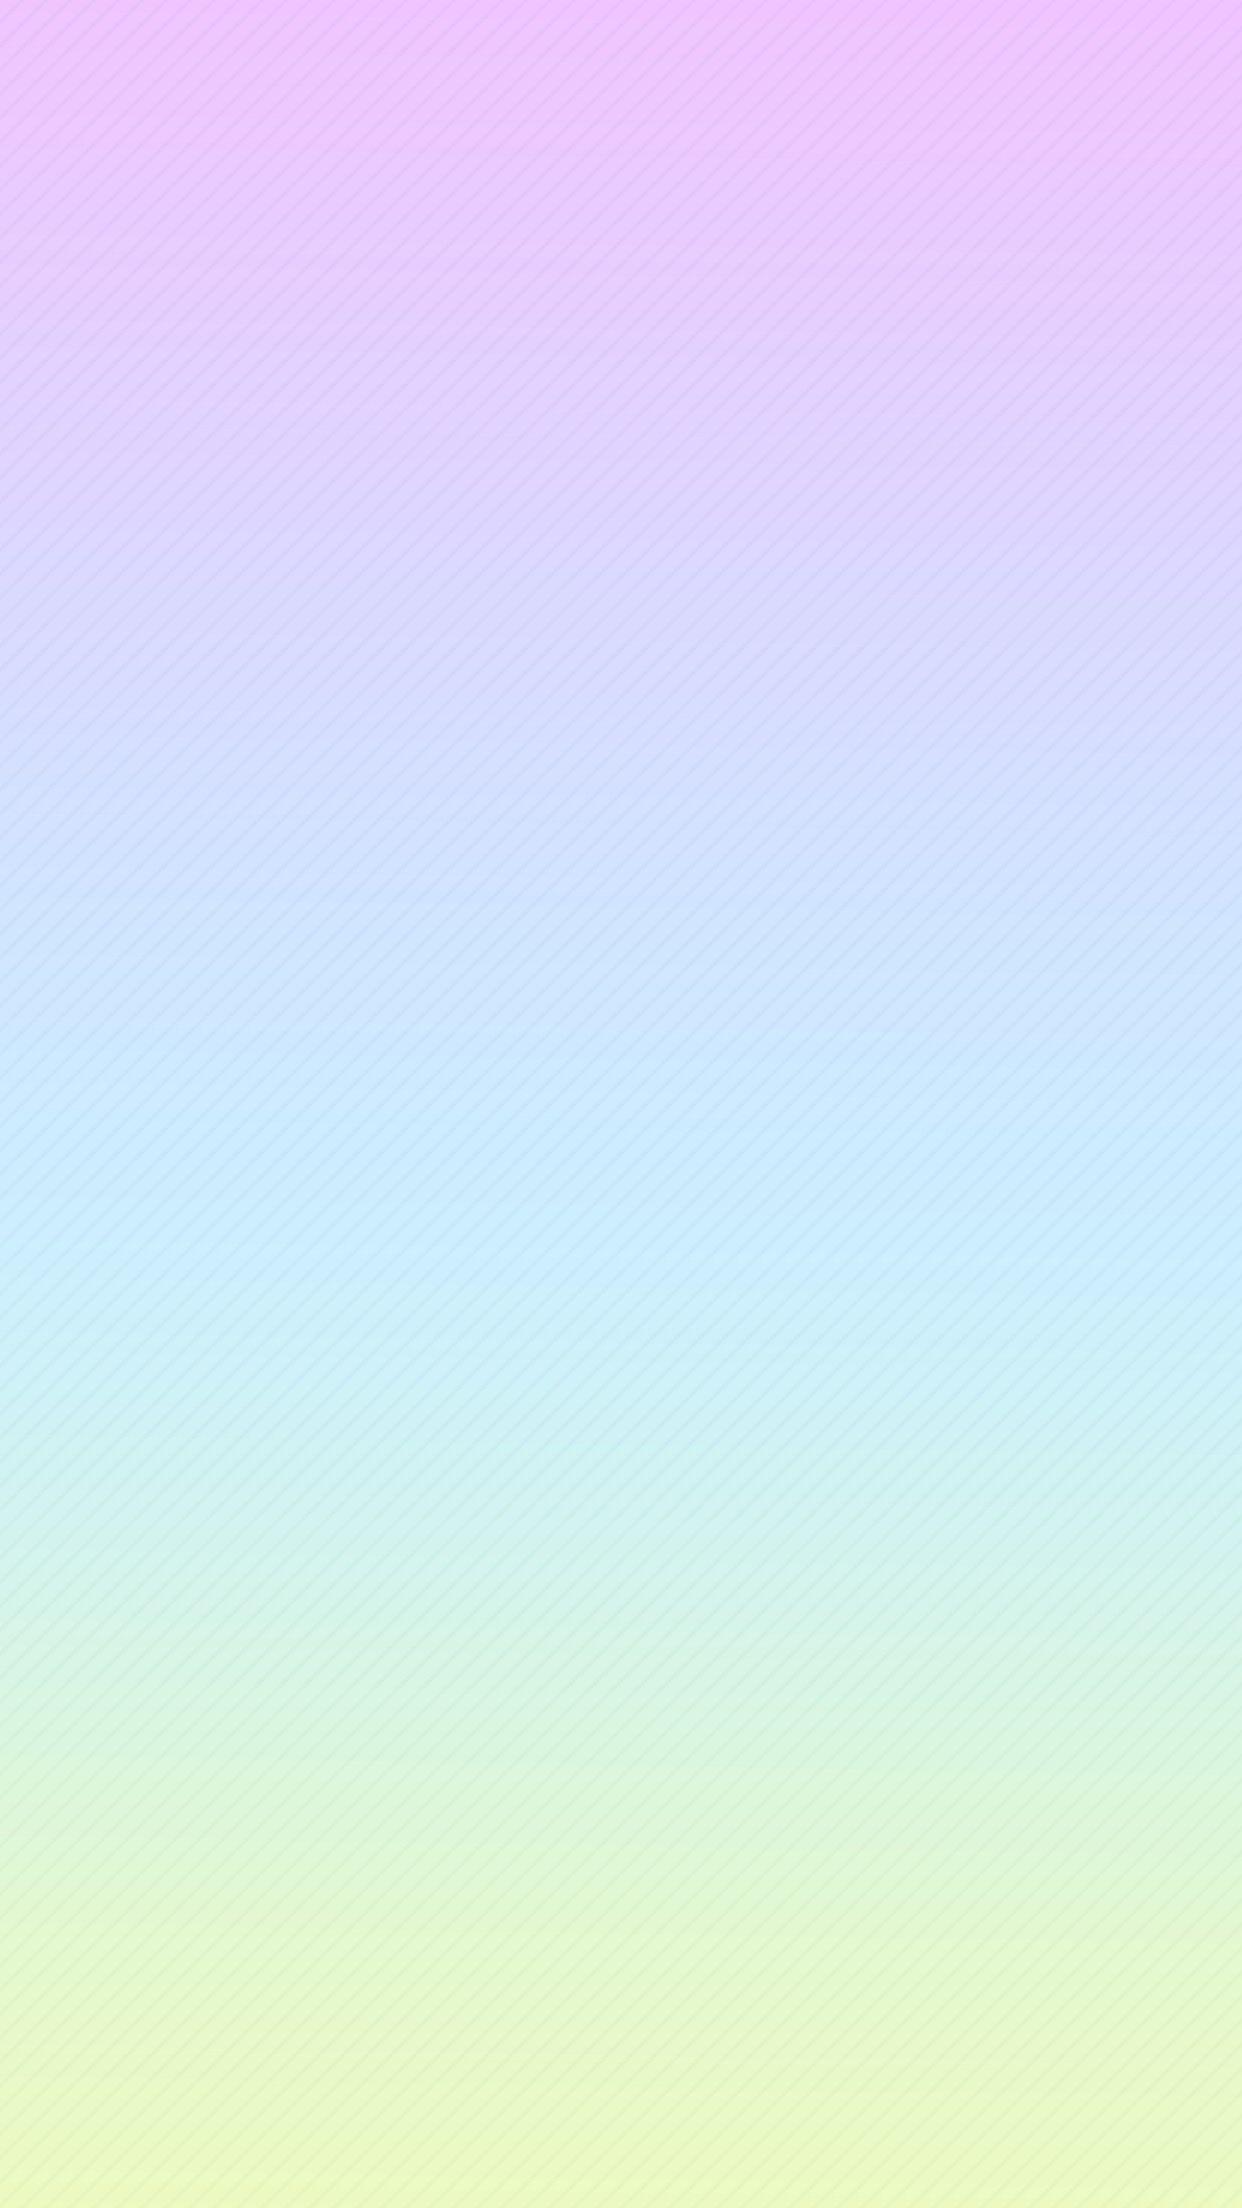 Wallpaper, background, iPhone, Android, HD, pink, blue